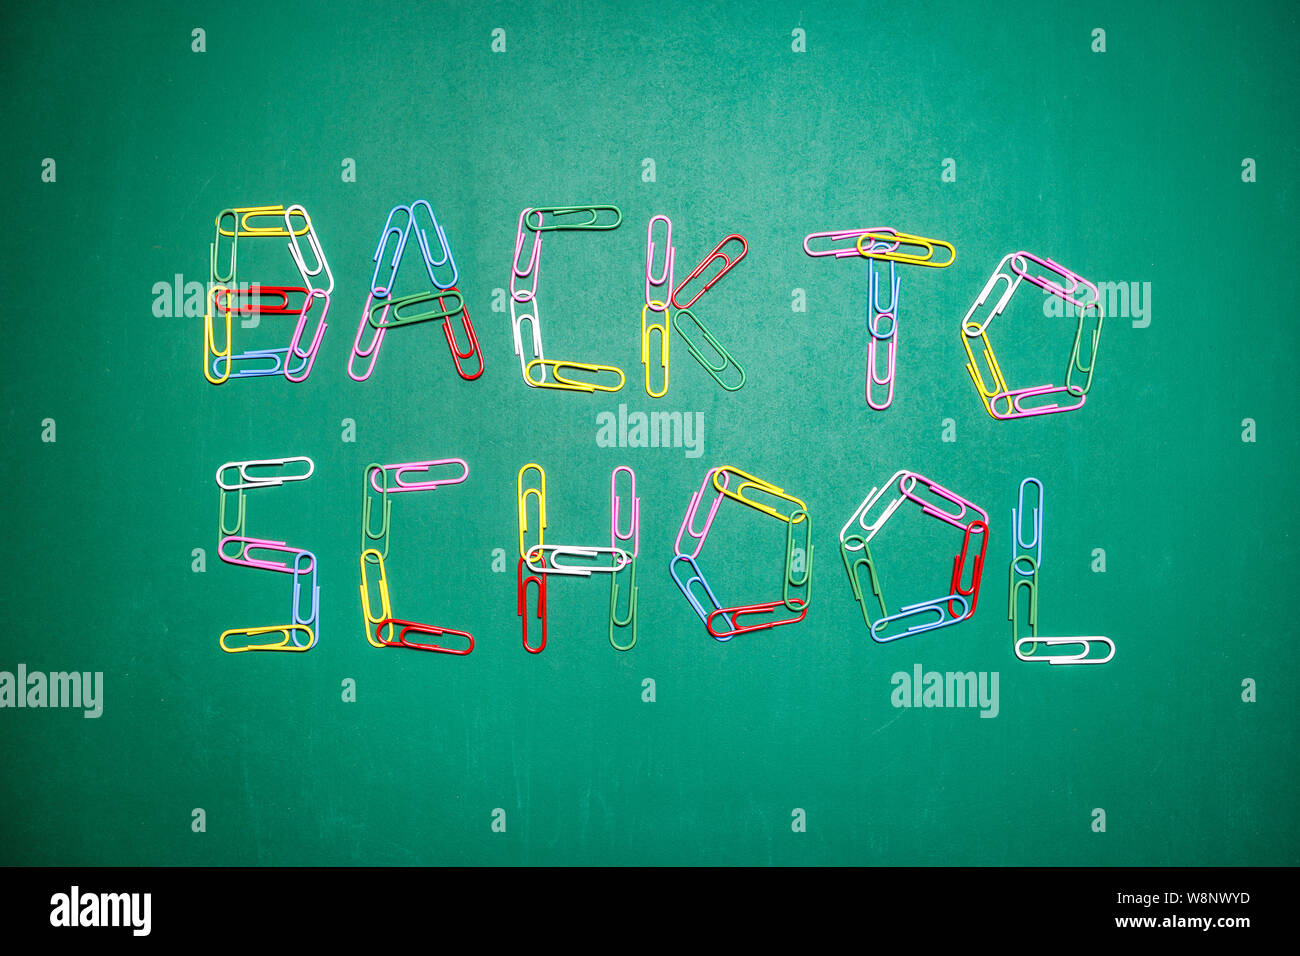 Background with the words back to school written with multicolored paper clips on green chalkboard. Back to school concept. Stock Photo